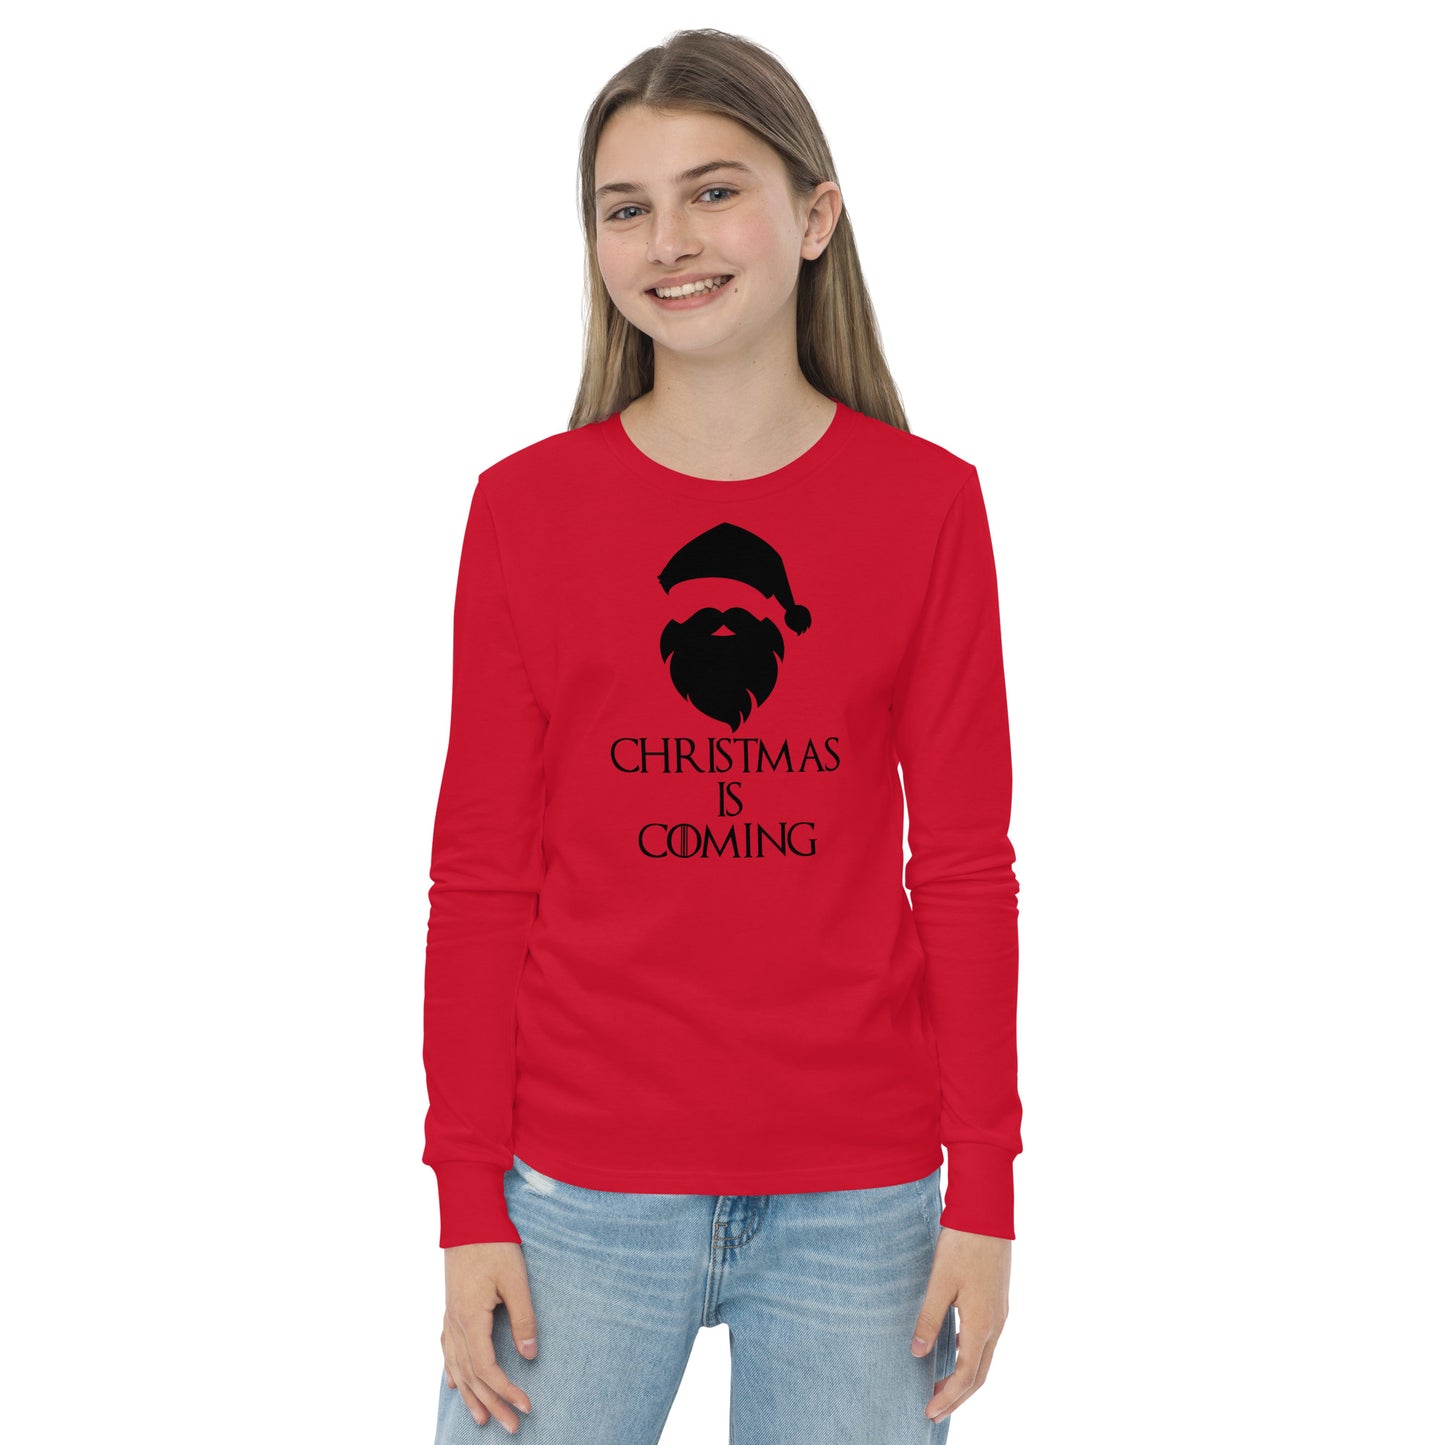 Youth 'Christmas is Coming' Long Sleeve T-Shirt